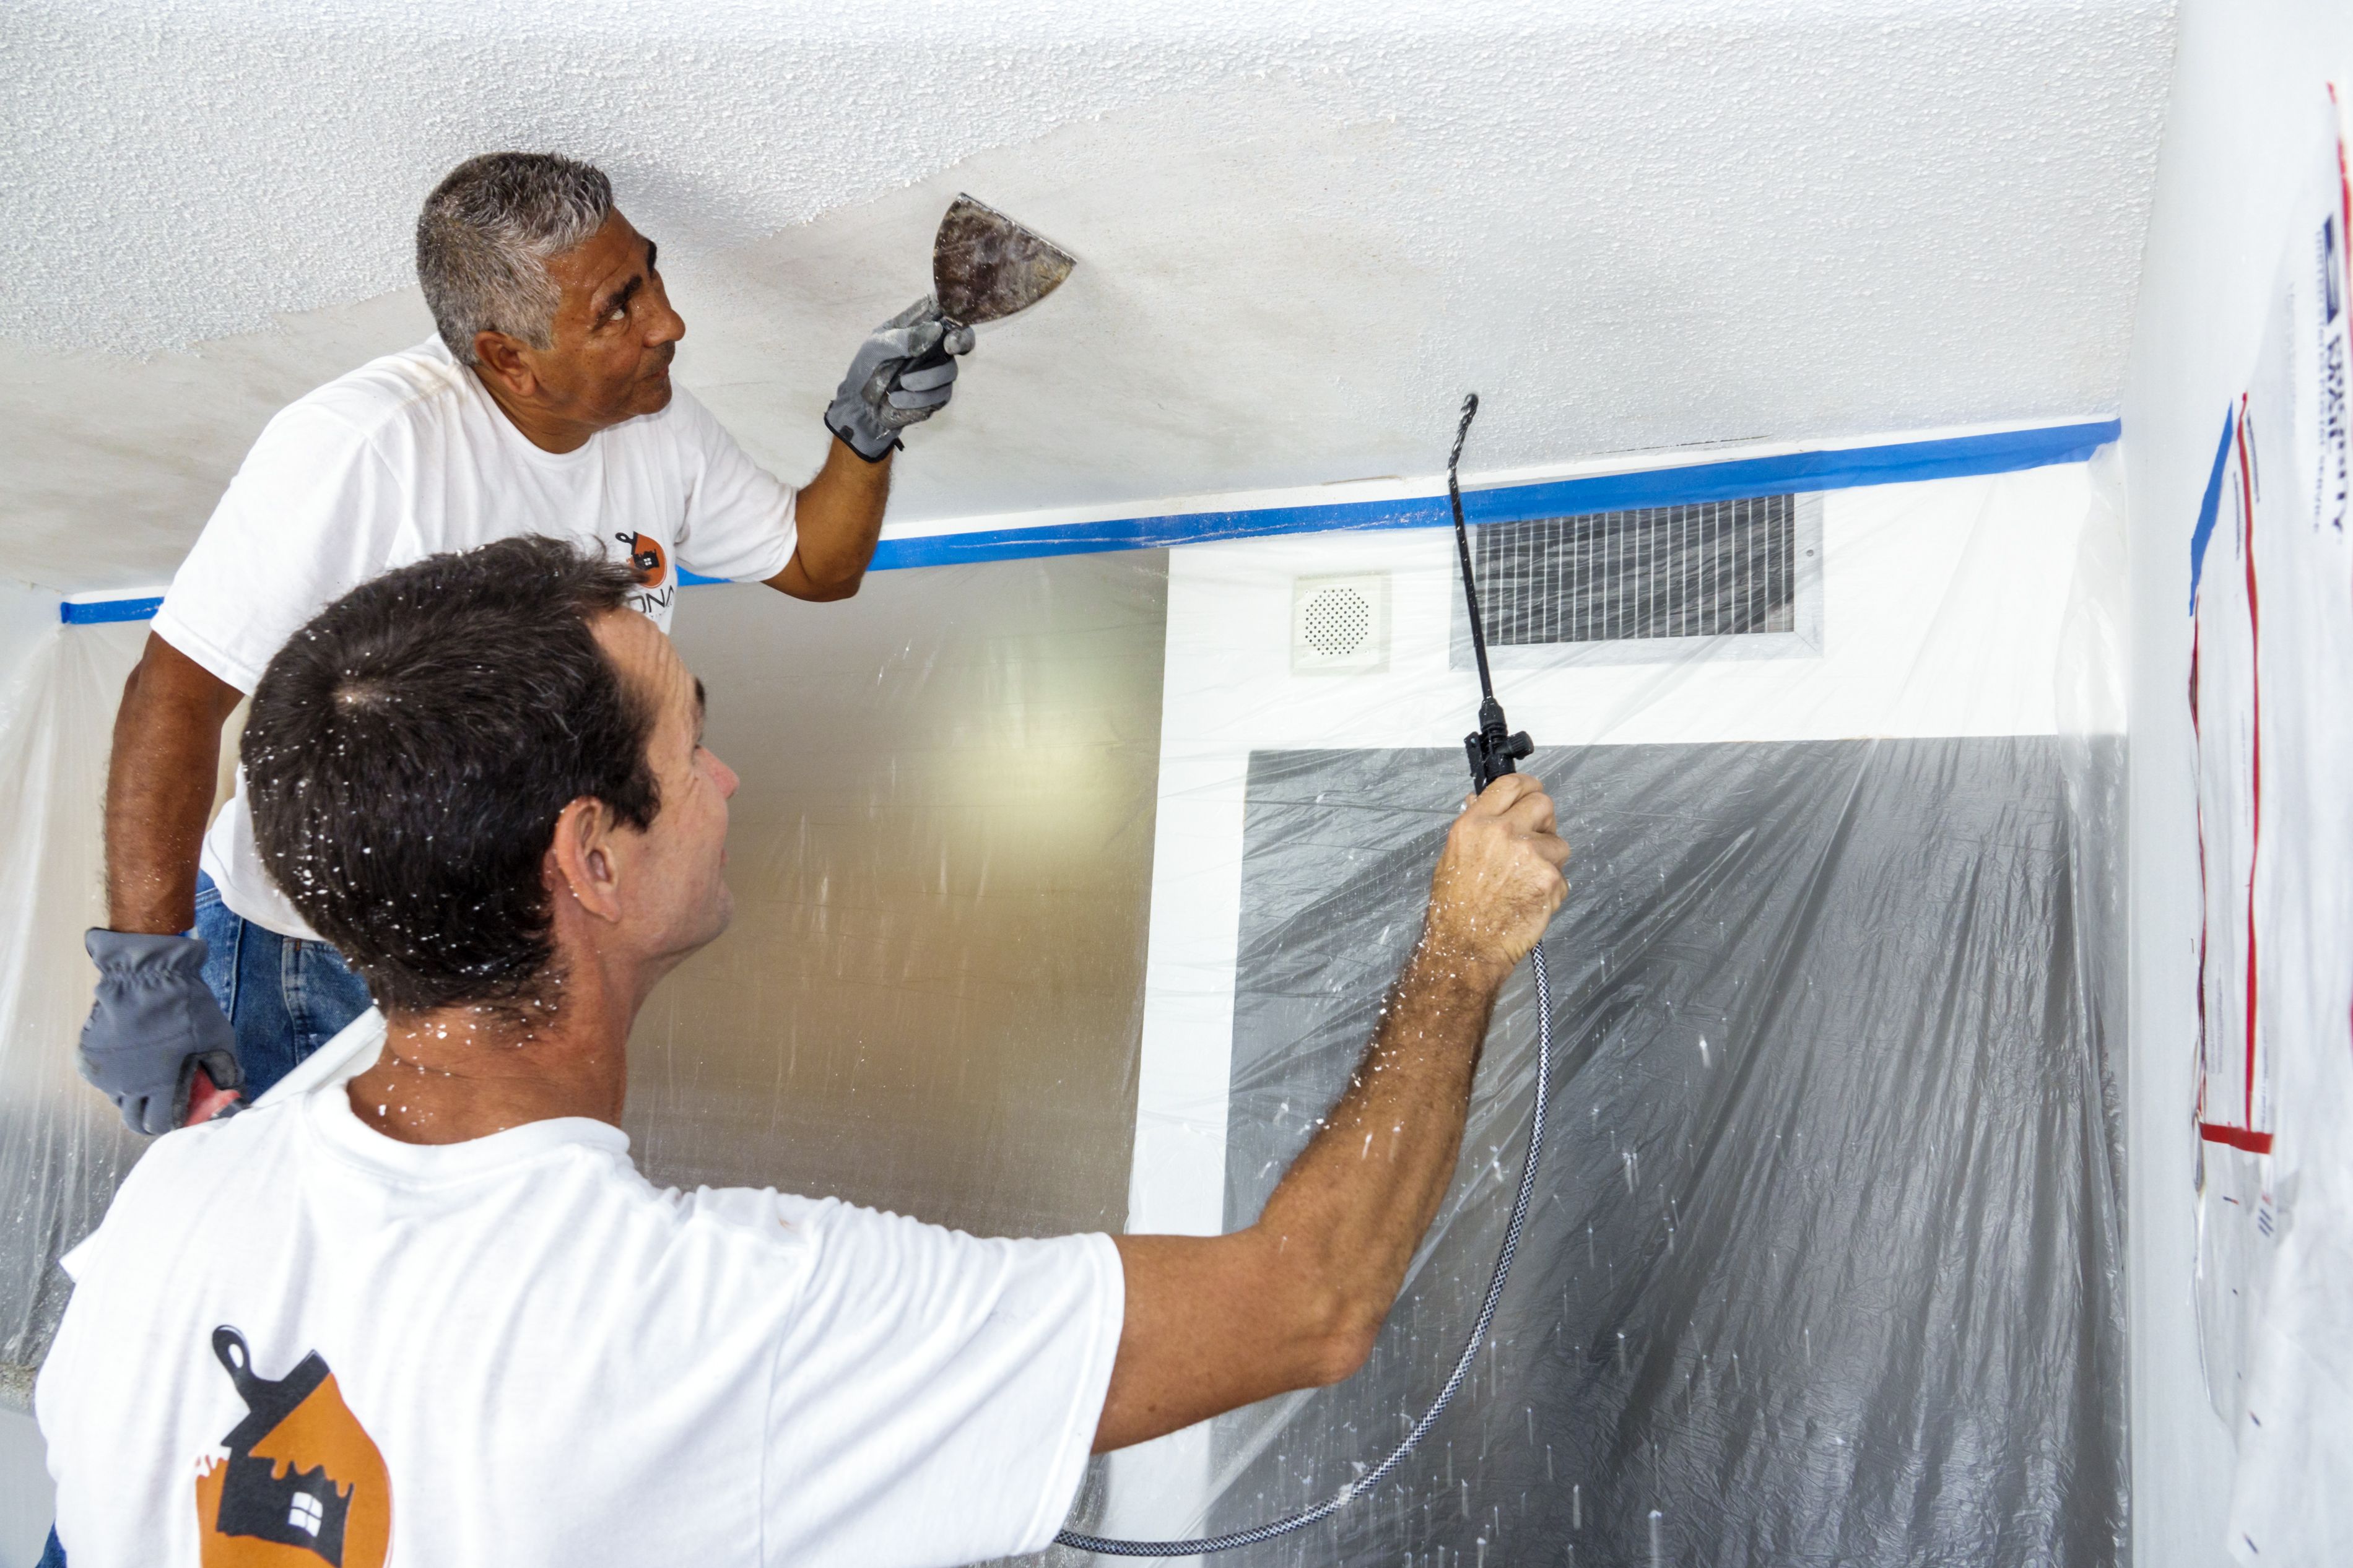 Popcorn Ceiling Removal How To Remove, Popcorn Ceiling Removal Tools Needed